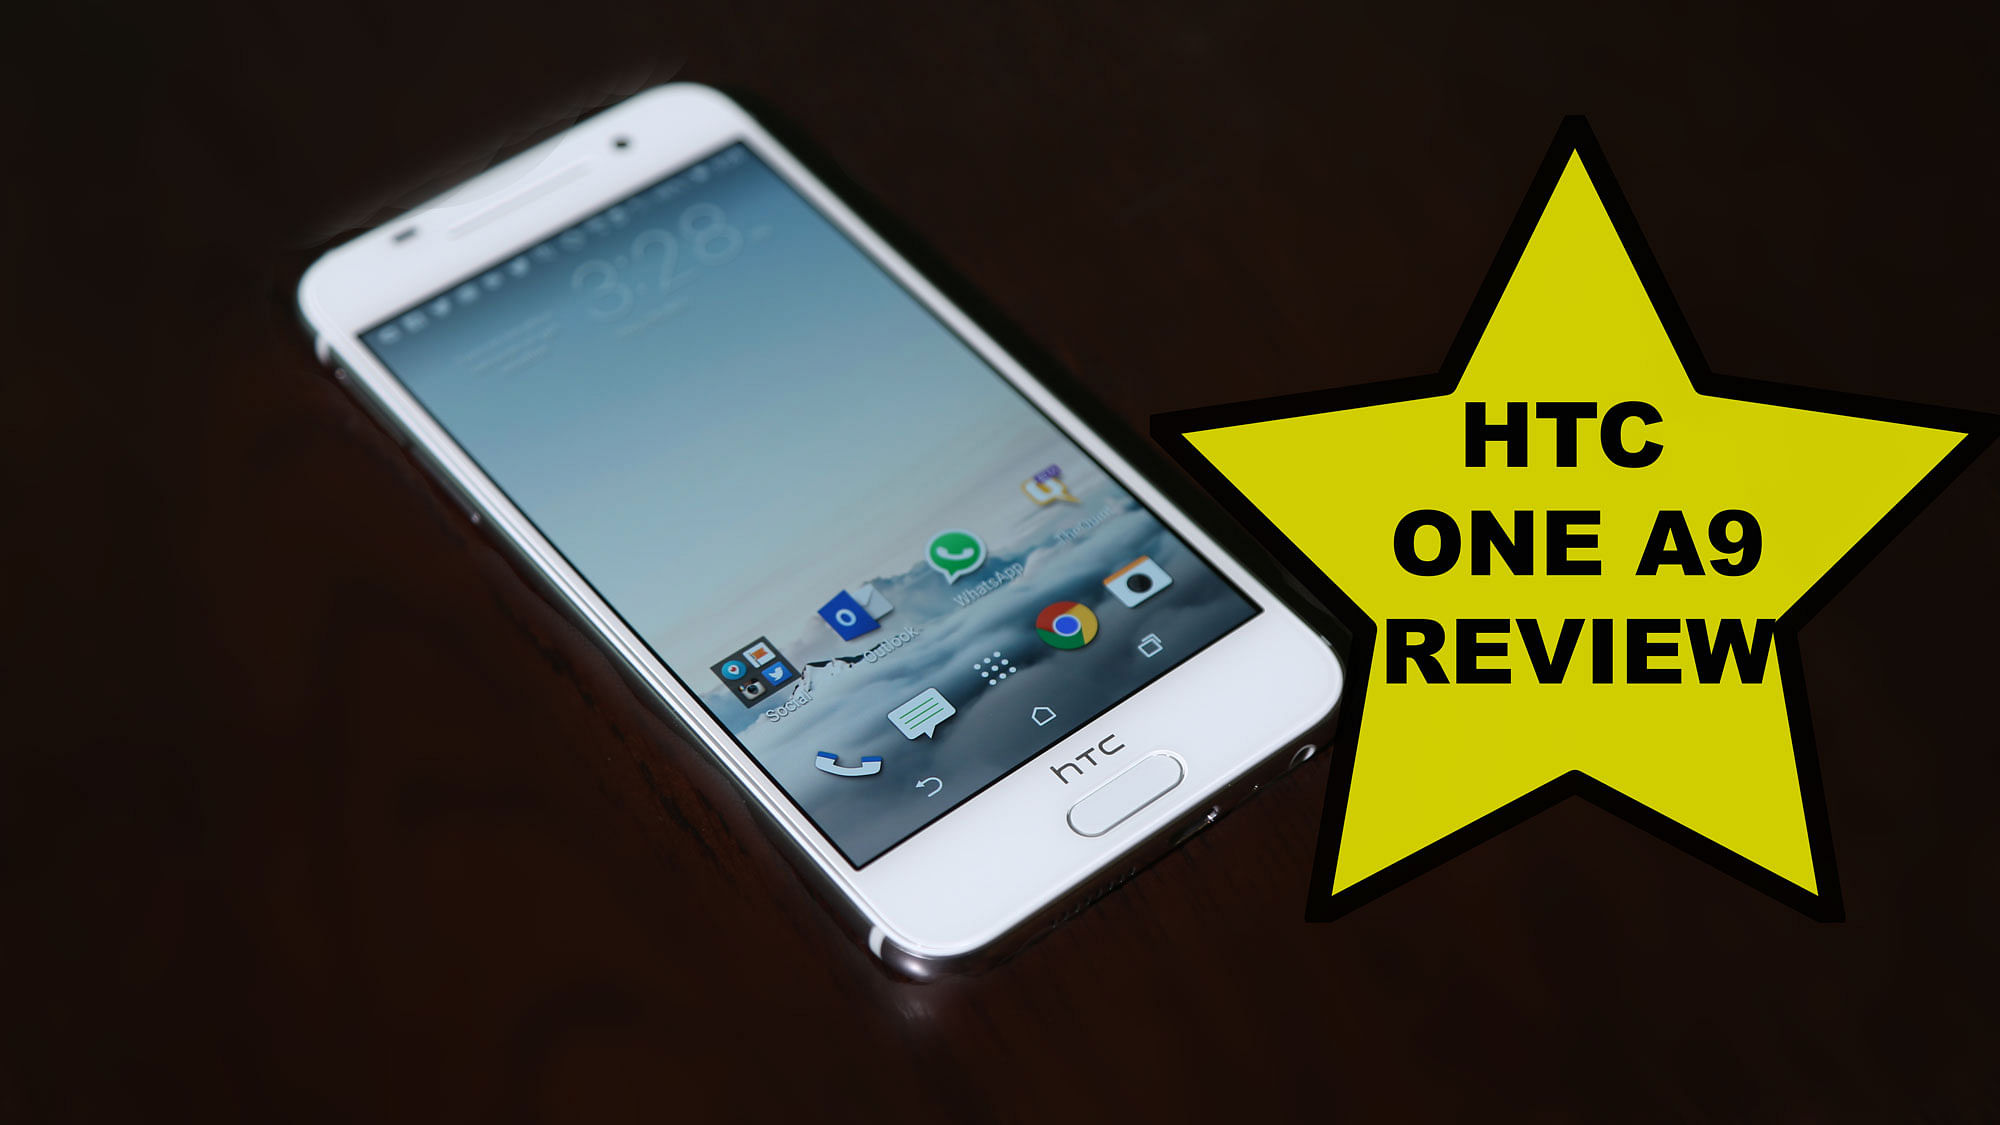 HTC One A9 is the company’s latest flagship smartphone and is priced at Rs 29,990. (Photo: <b>The Quint</b>)